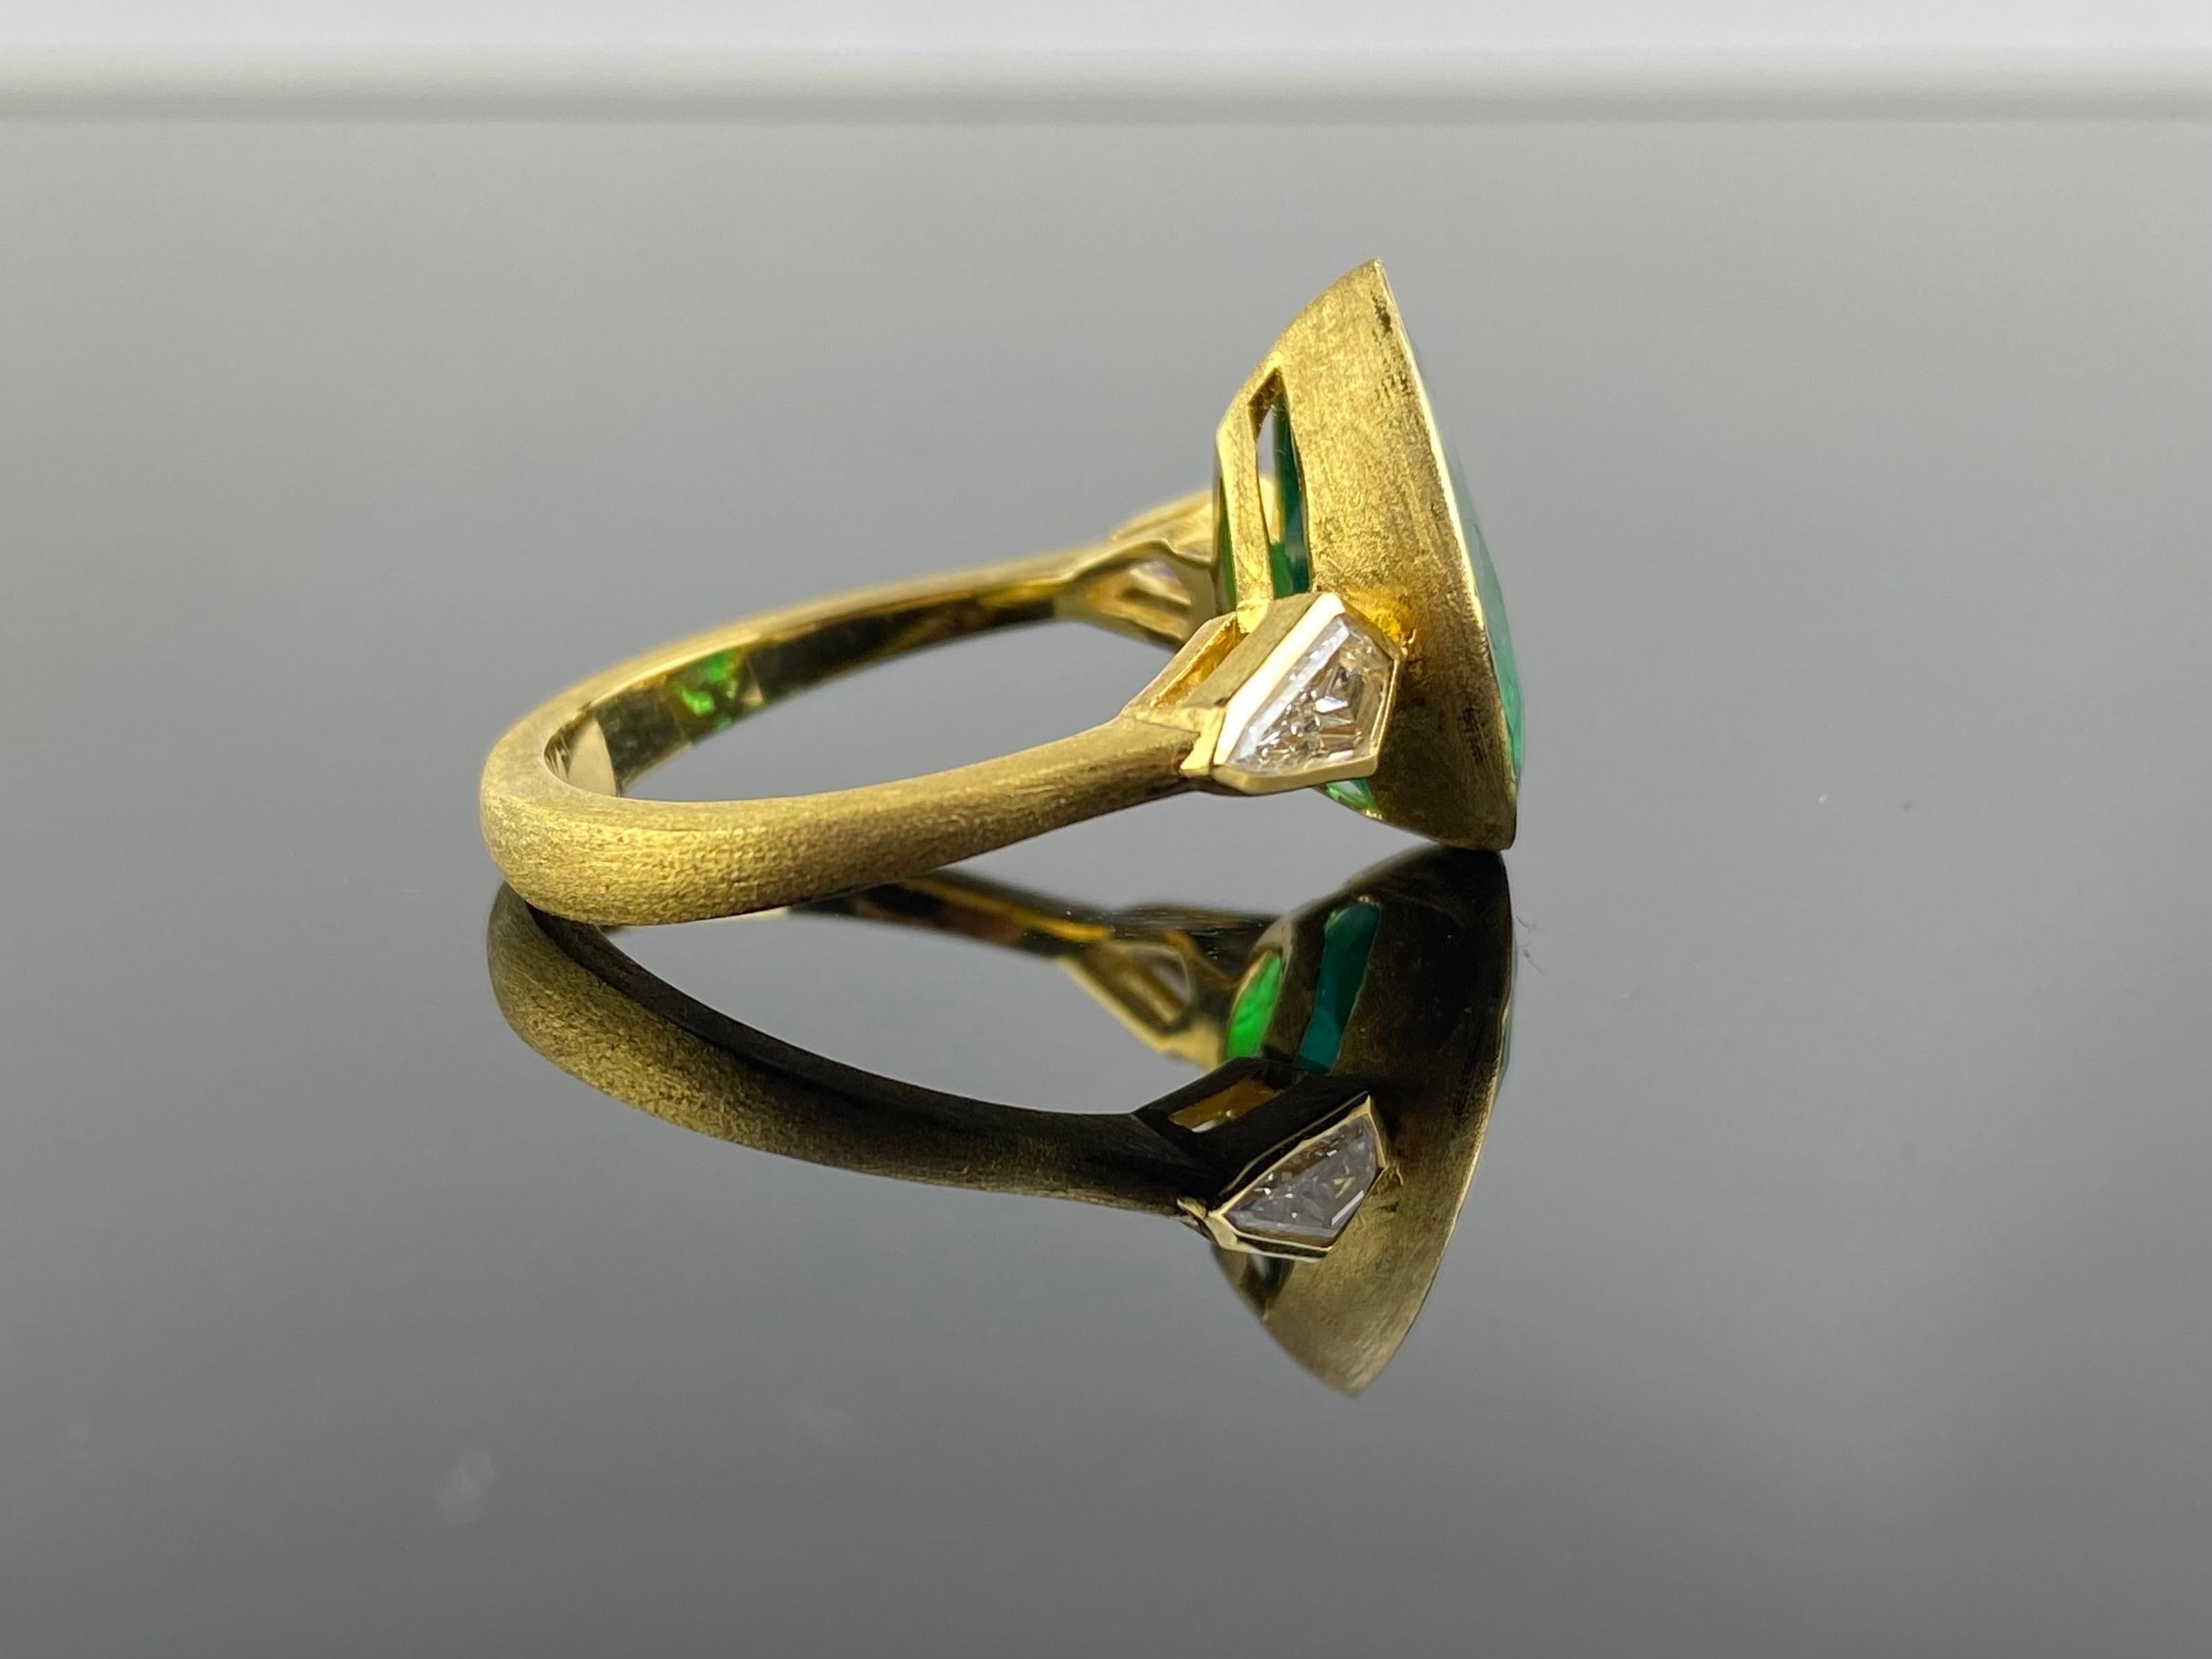 An art-deco looking, natural 4.68 carat pear shaped Zambian Emerald ring with 0.50 carat kite-shaped VS quality Diamond side stone ring. This is a very unique ring, set in matte finish solid 18K Yellow Gold. The center stone in has a stunning vivid